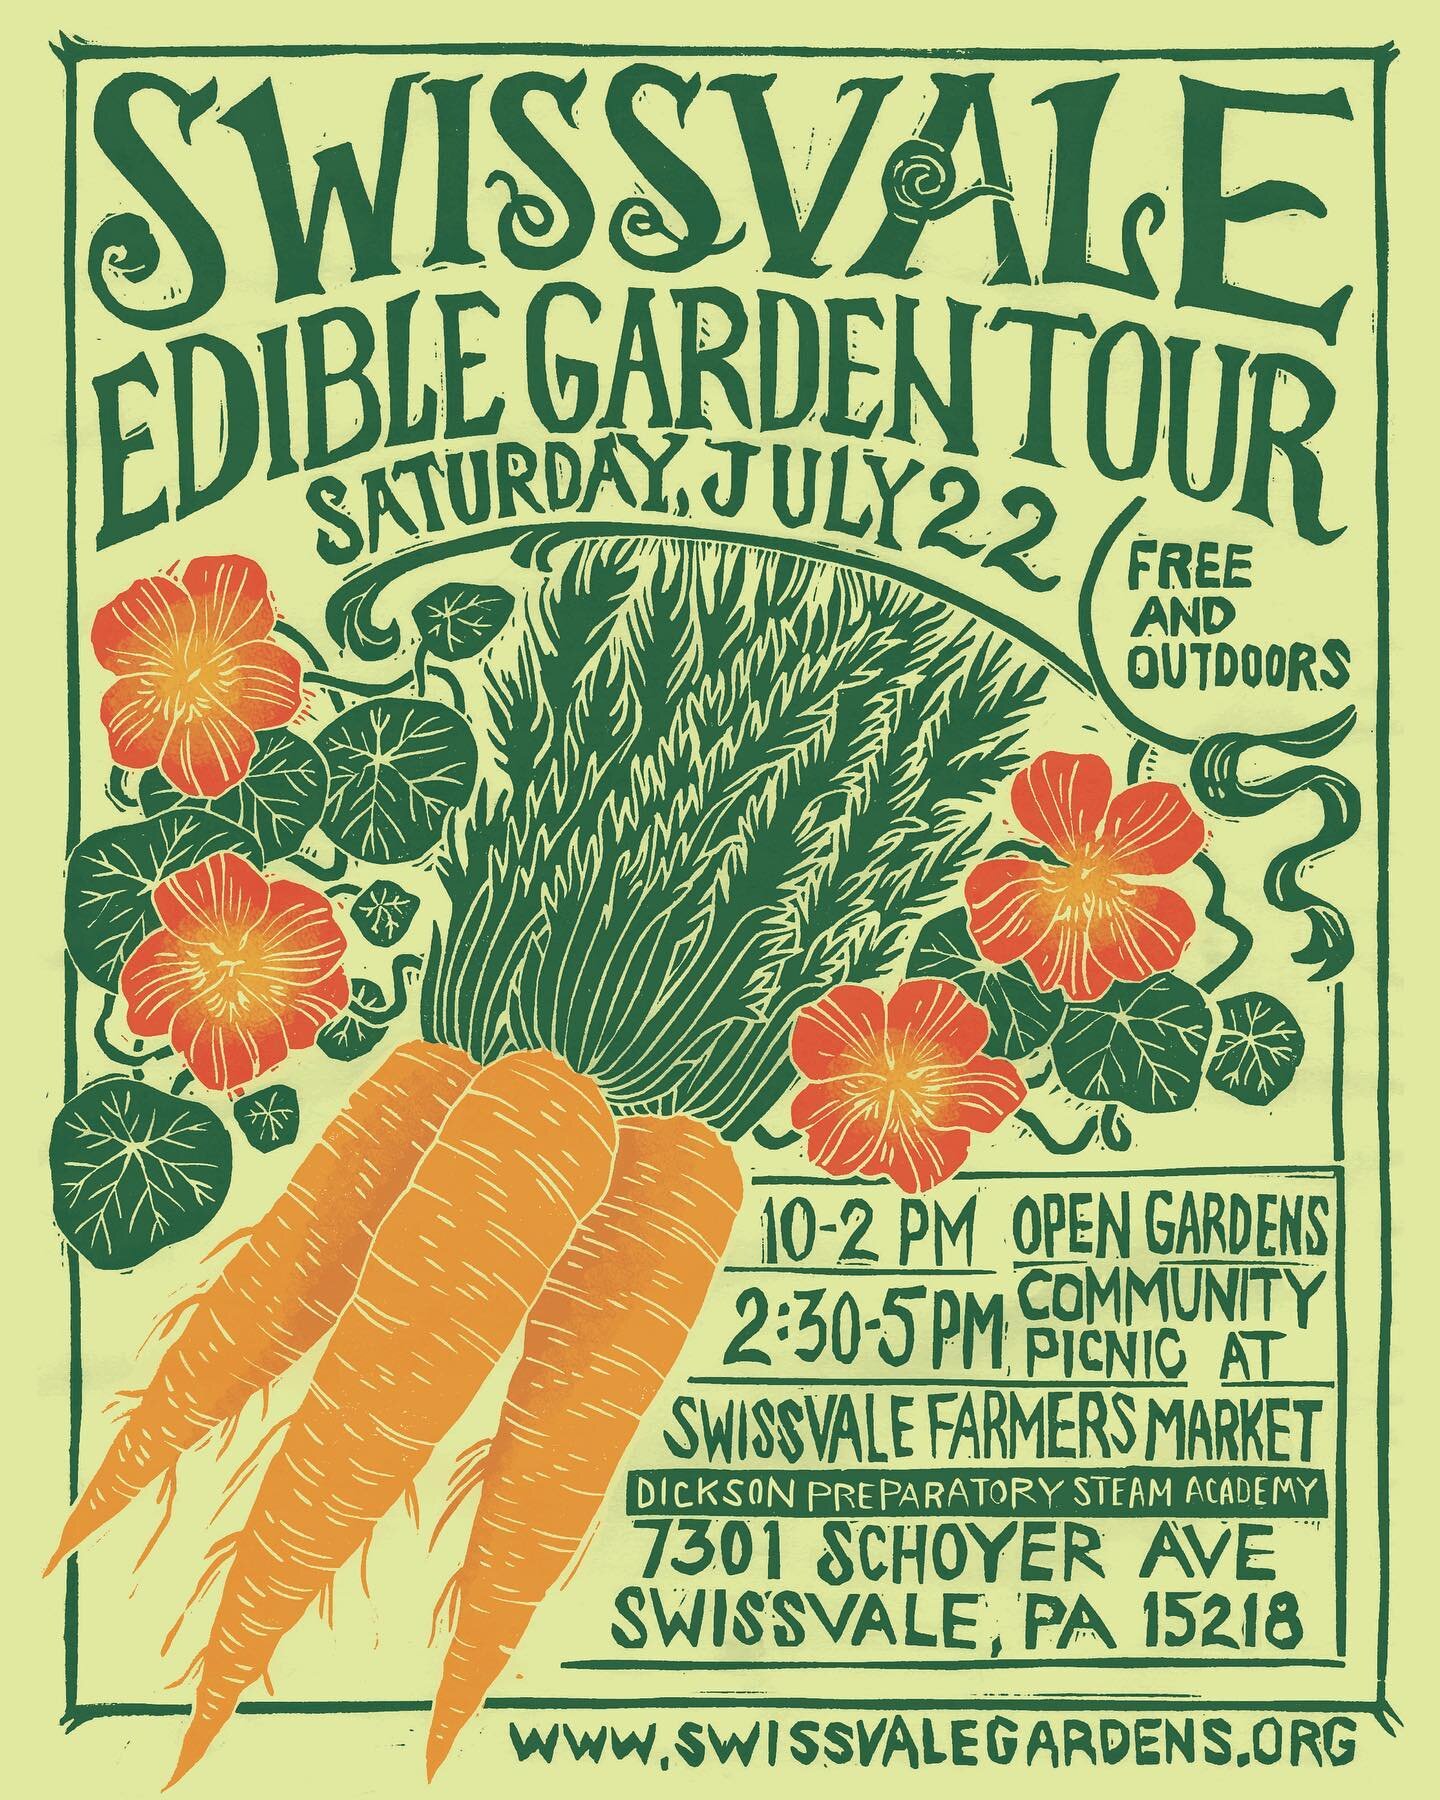 We&rsquo;re excited to share our new Swissvale Edible Garden Tour flyer, created by local artist Abby Diamond.

🥕Abby knew we were celebrating Swissvale&rsquo;s 125th borough-birthday and all things carrots this year, and she was able to incorporate